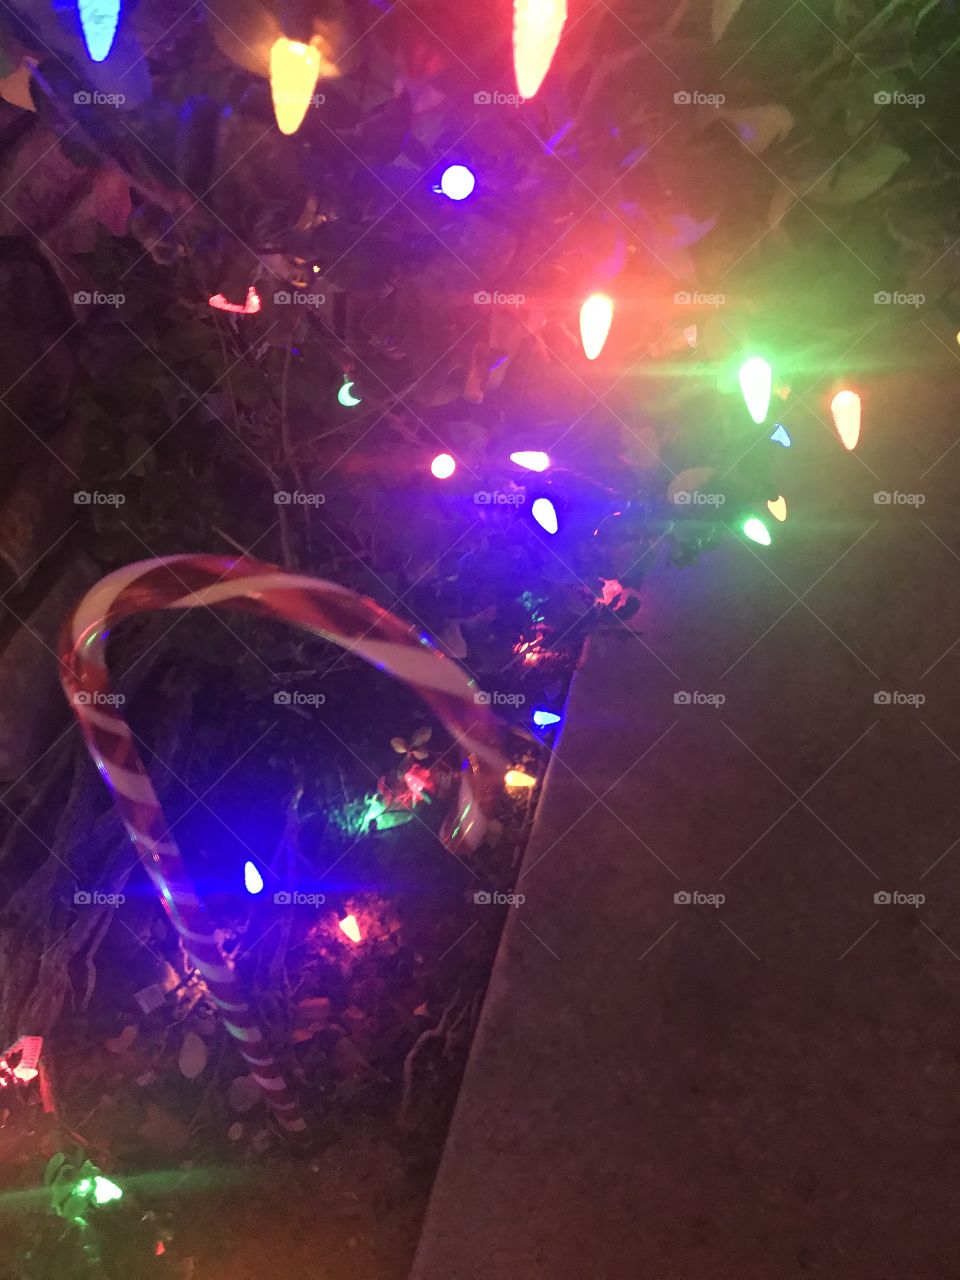 A candy cane Christmas decoration with Twinkling colorful Christmas lights lighting the walkway at night. 